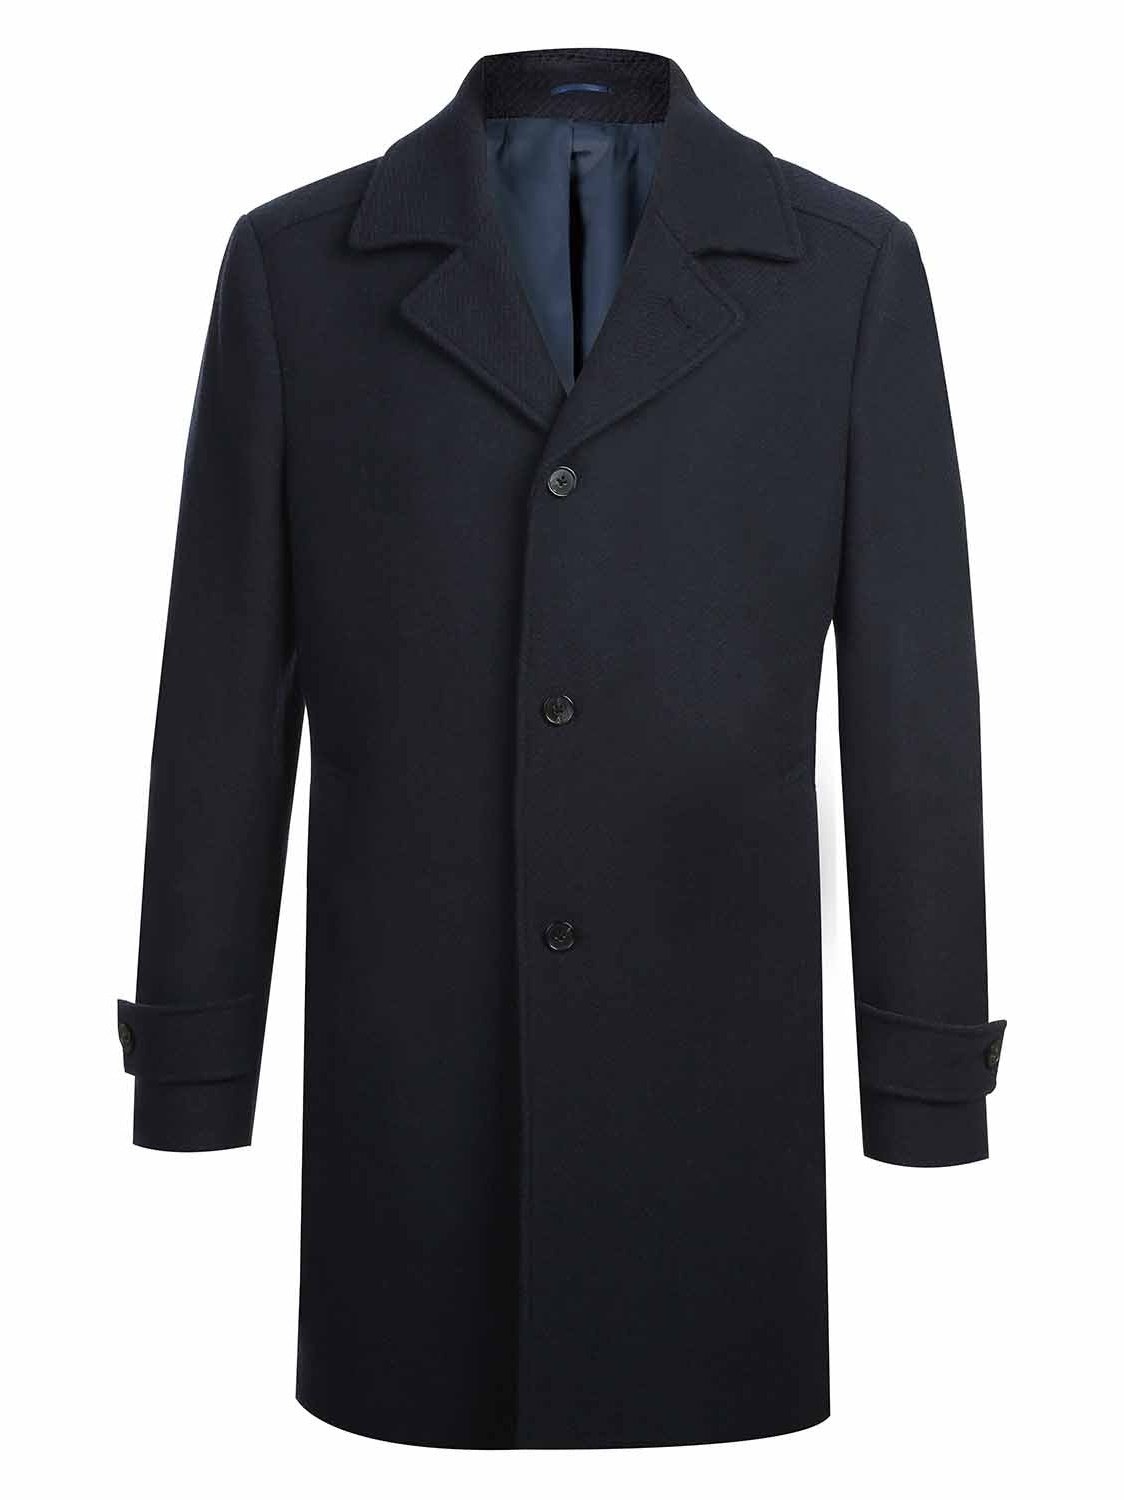 English Laundry Solid Navy Wool Blend Long Coat